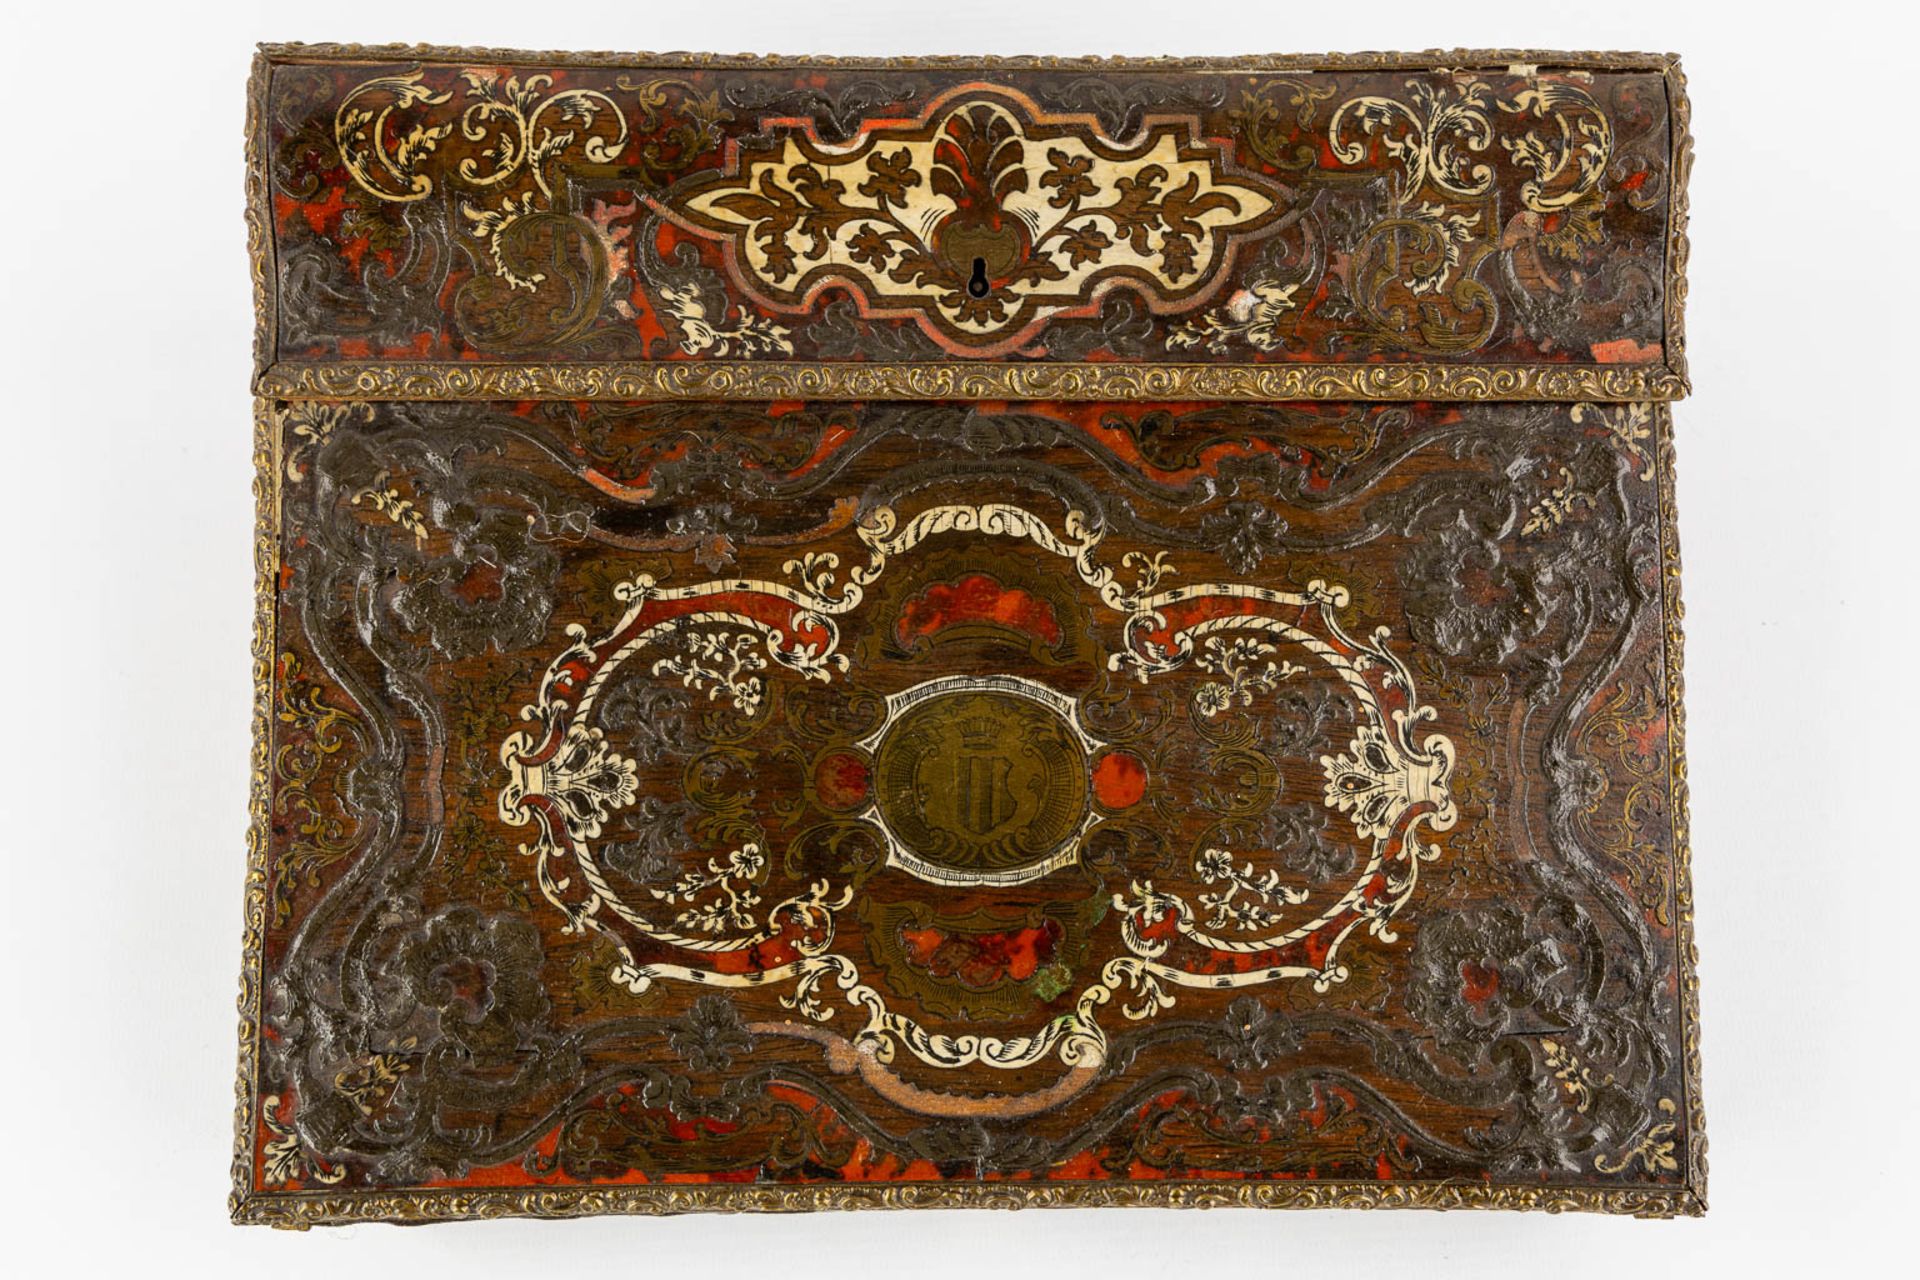 An antique writing desk, Boulle and marquetry inlay. Napoleon 3. (L:24 x W:31 x H:10,5 cm) - Image 6 of 12